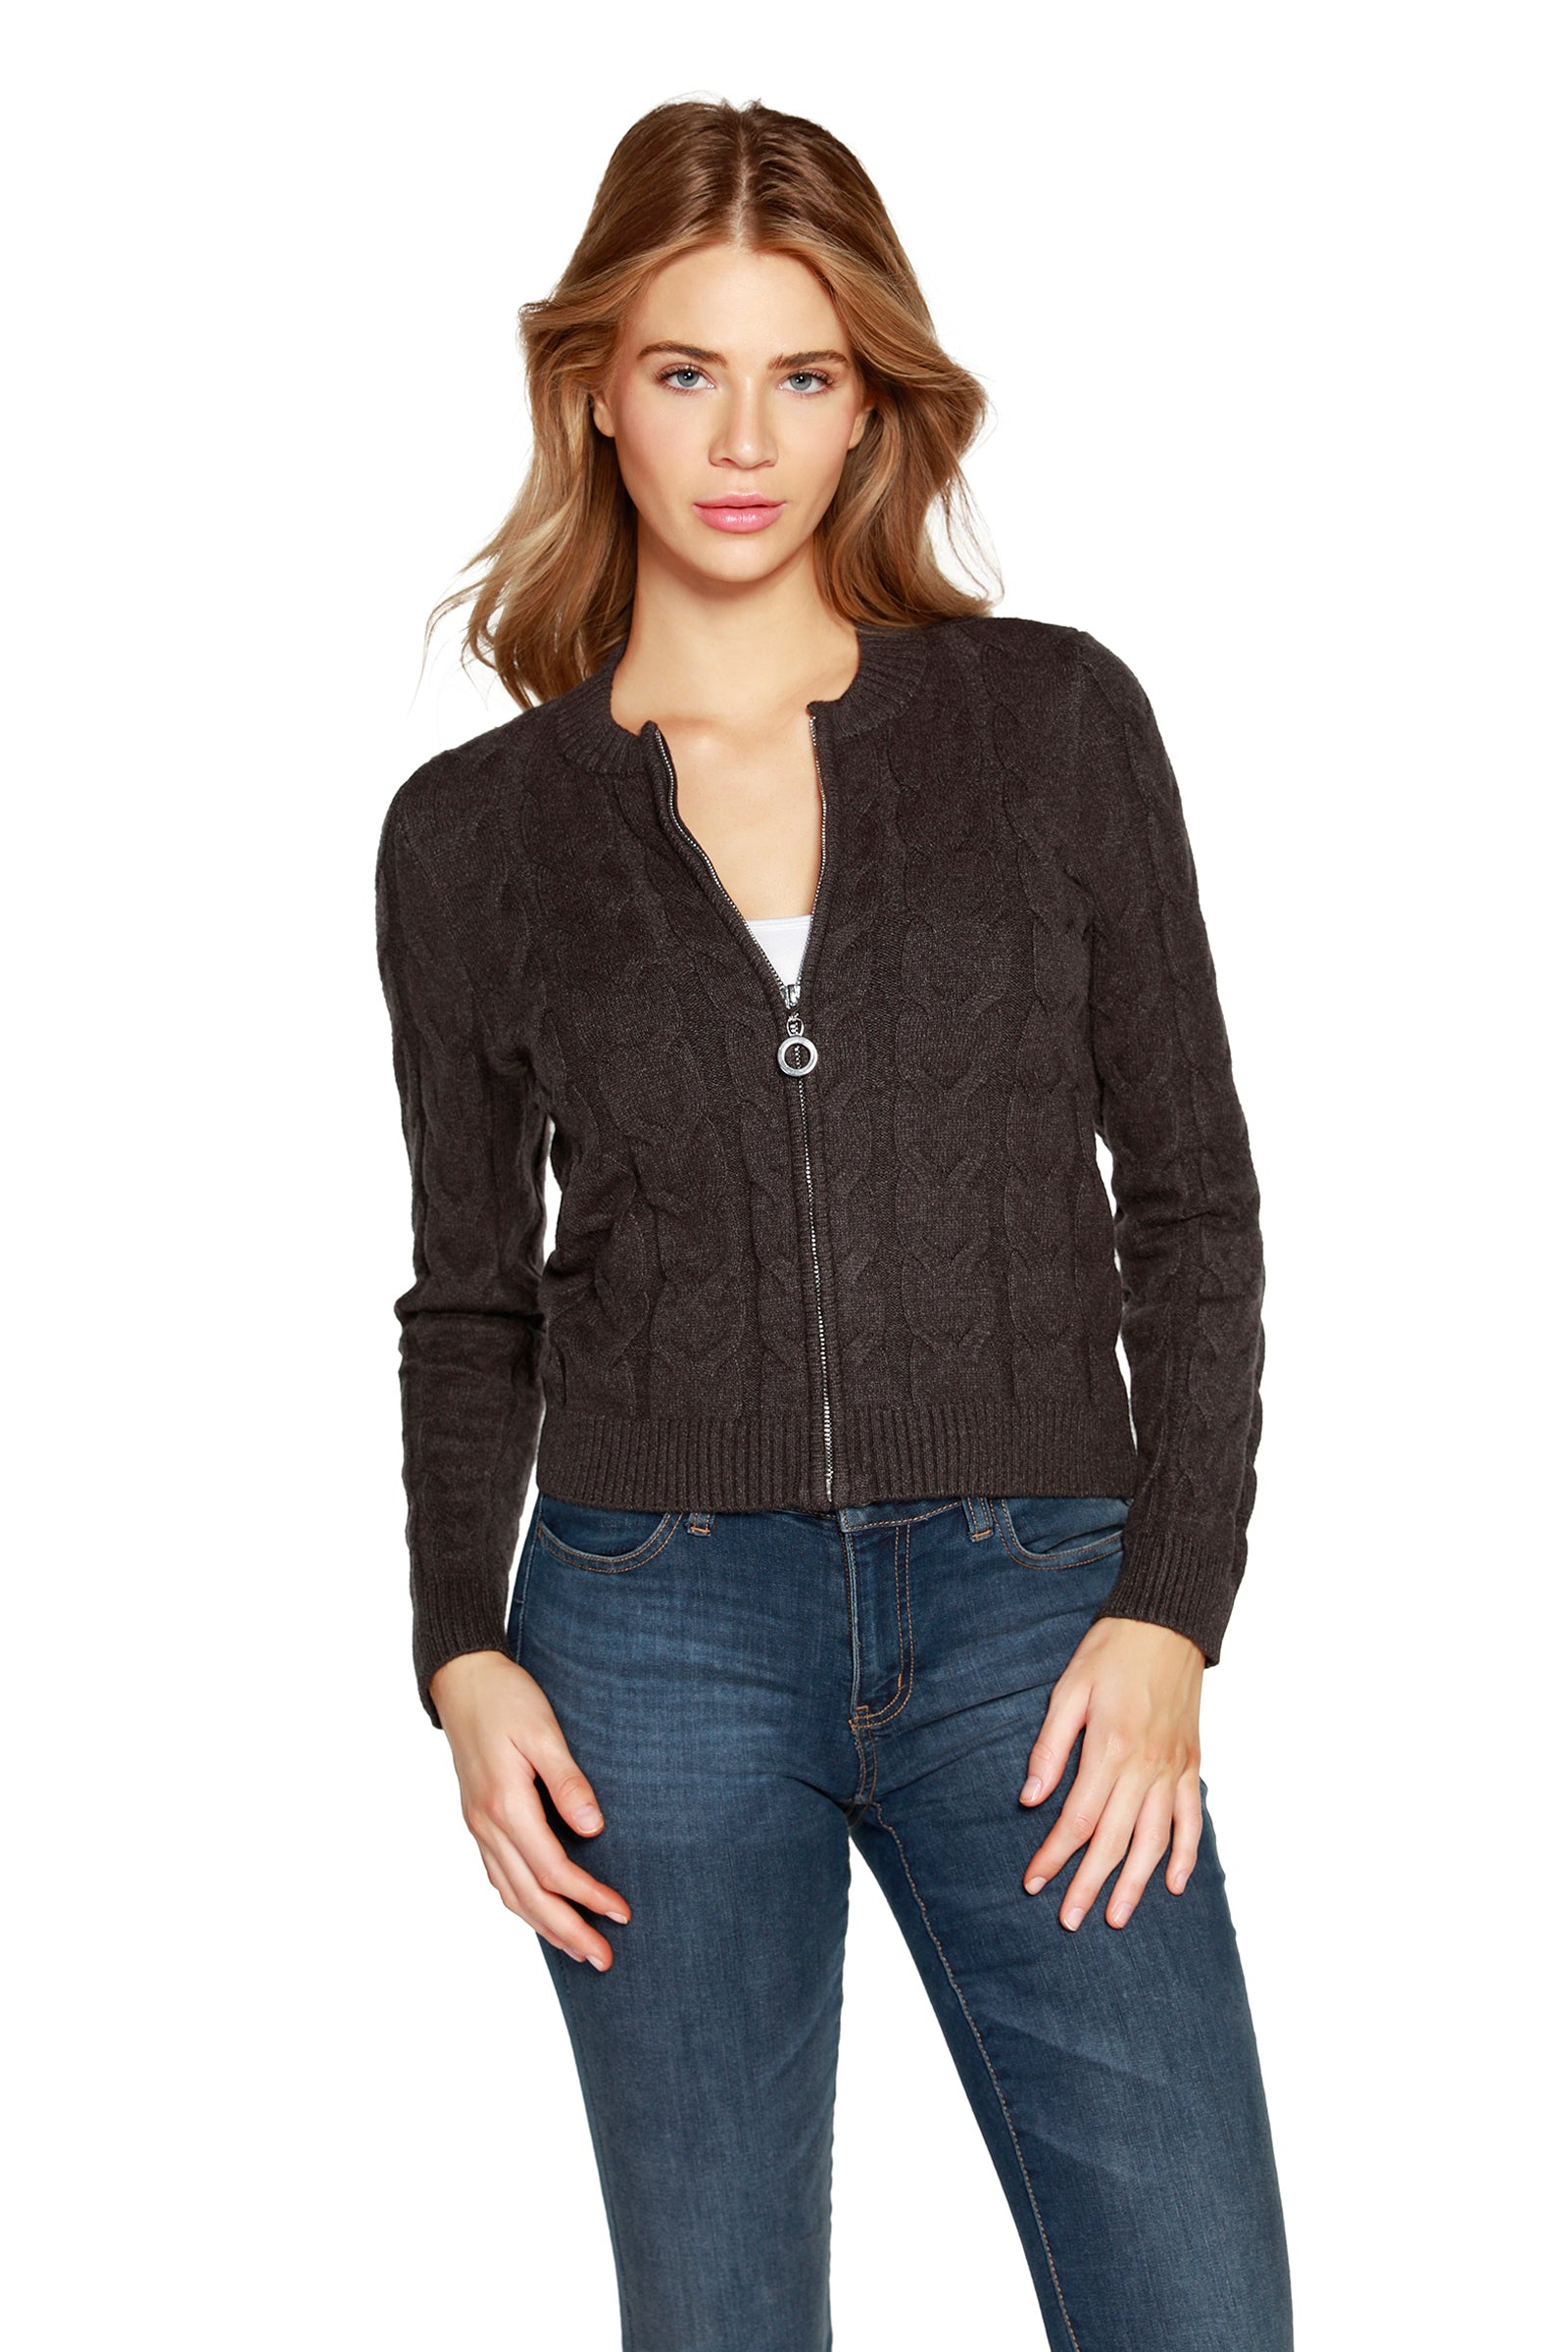 NEW COLORS Women's Cable Knit Zip Up Cardigan